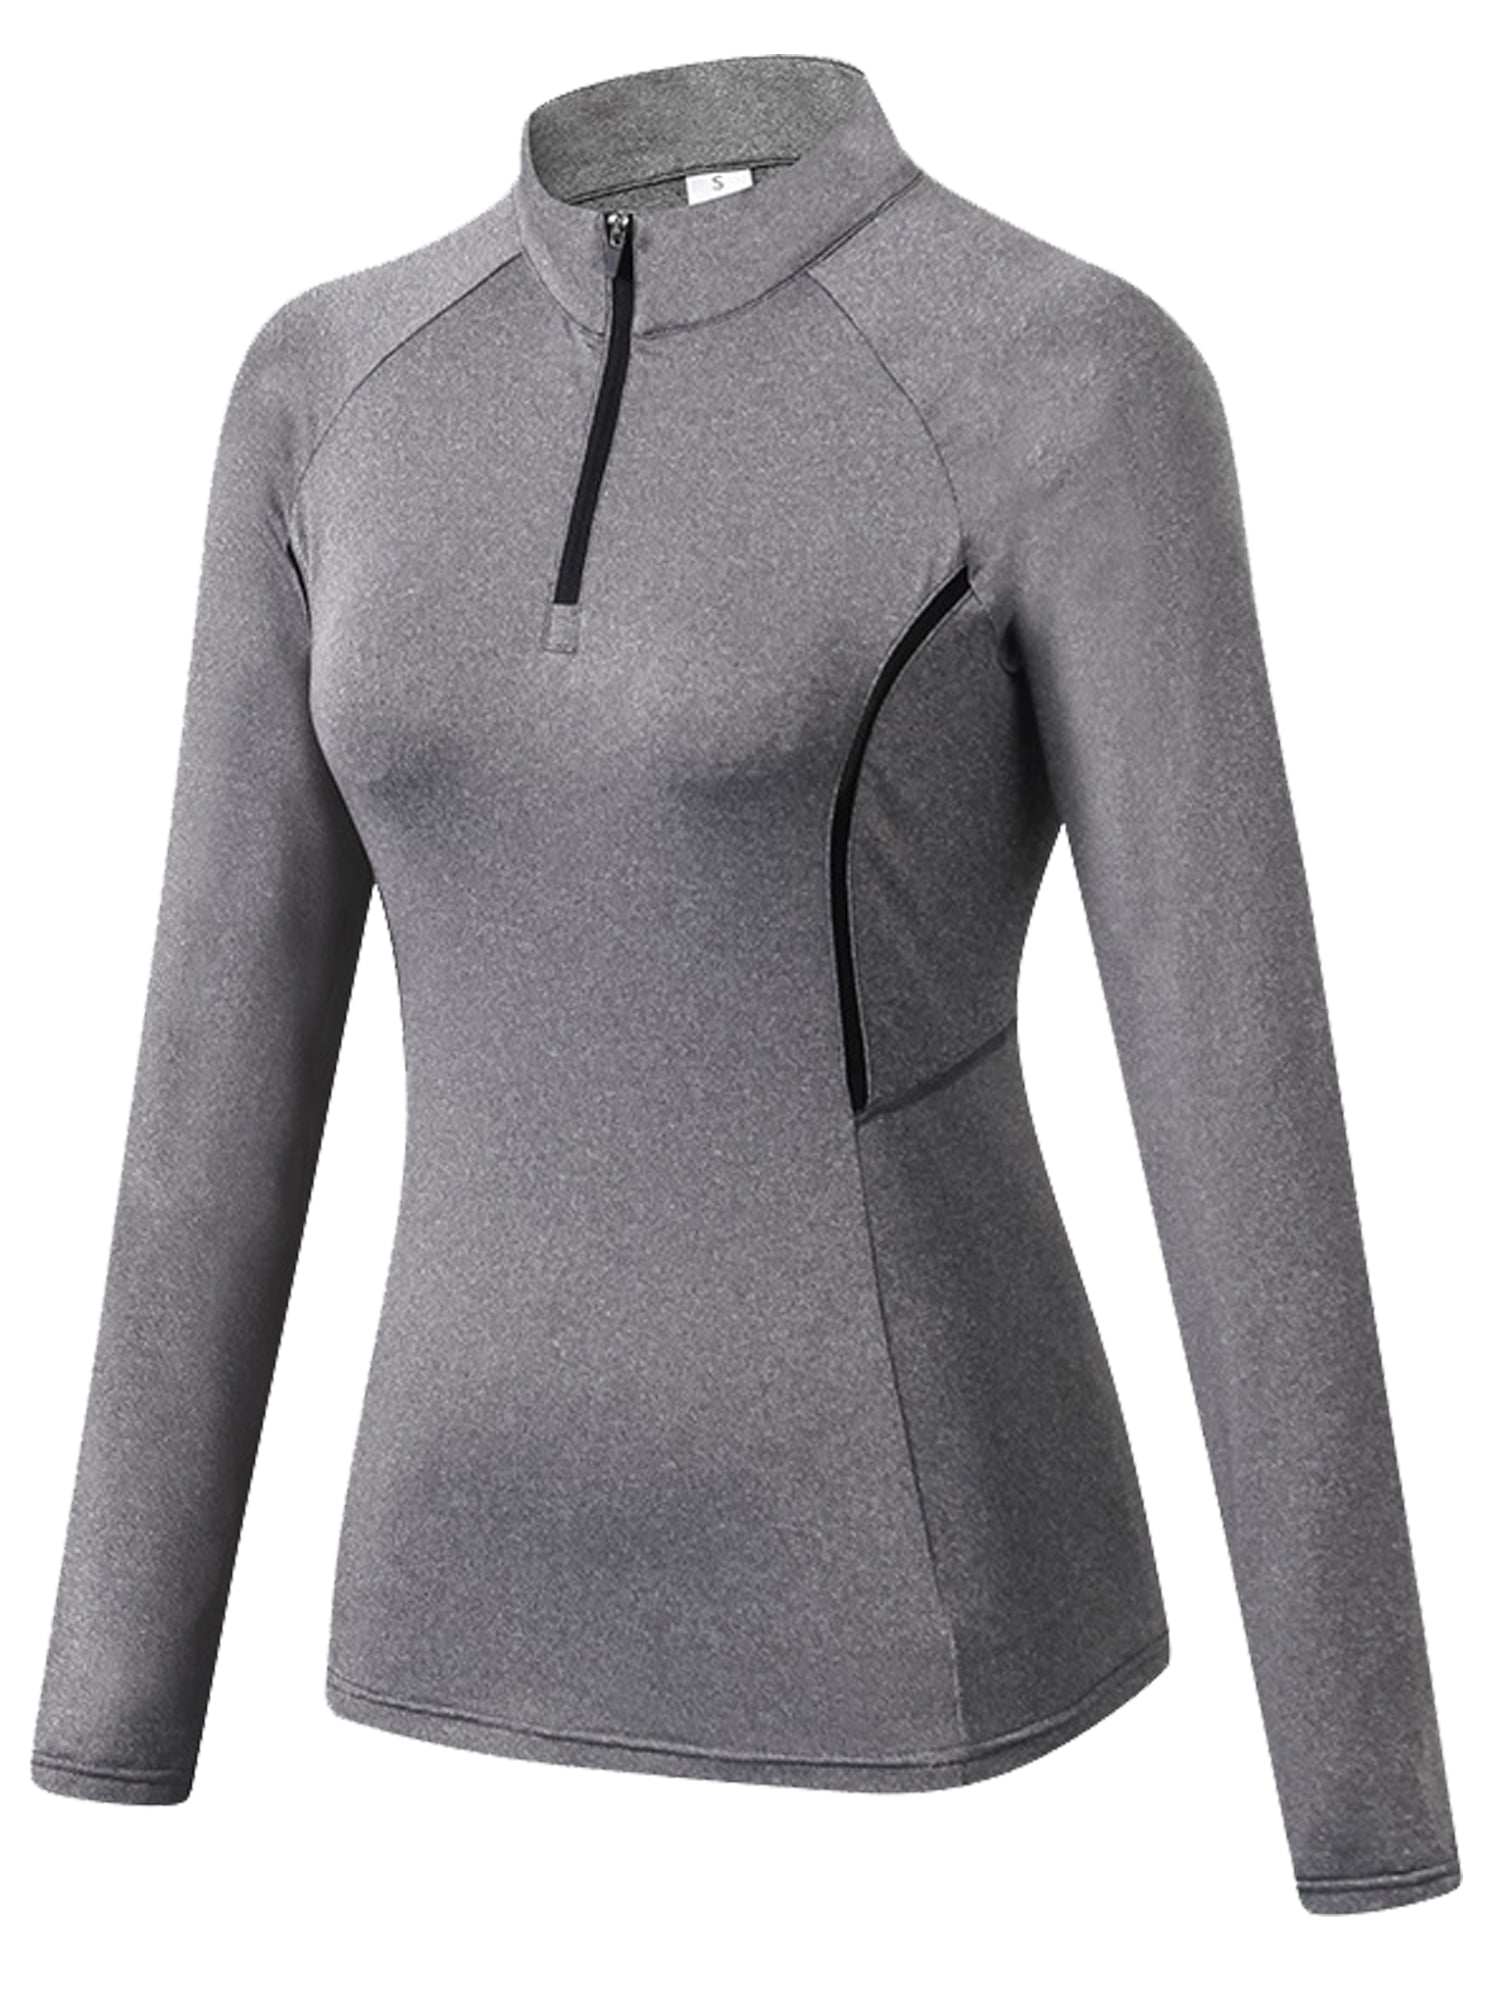 Women Compression 1/4 Zipper Mock Tops Thermal Workout Running Yoga Long Sleeved 